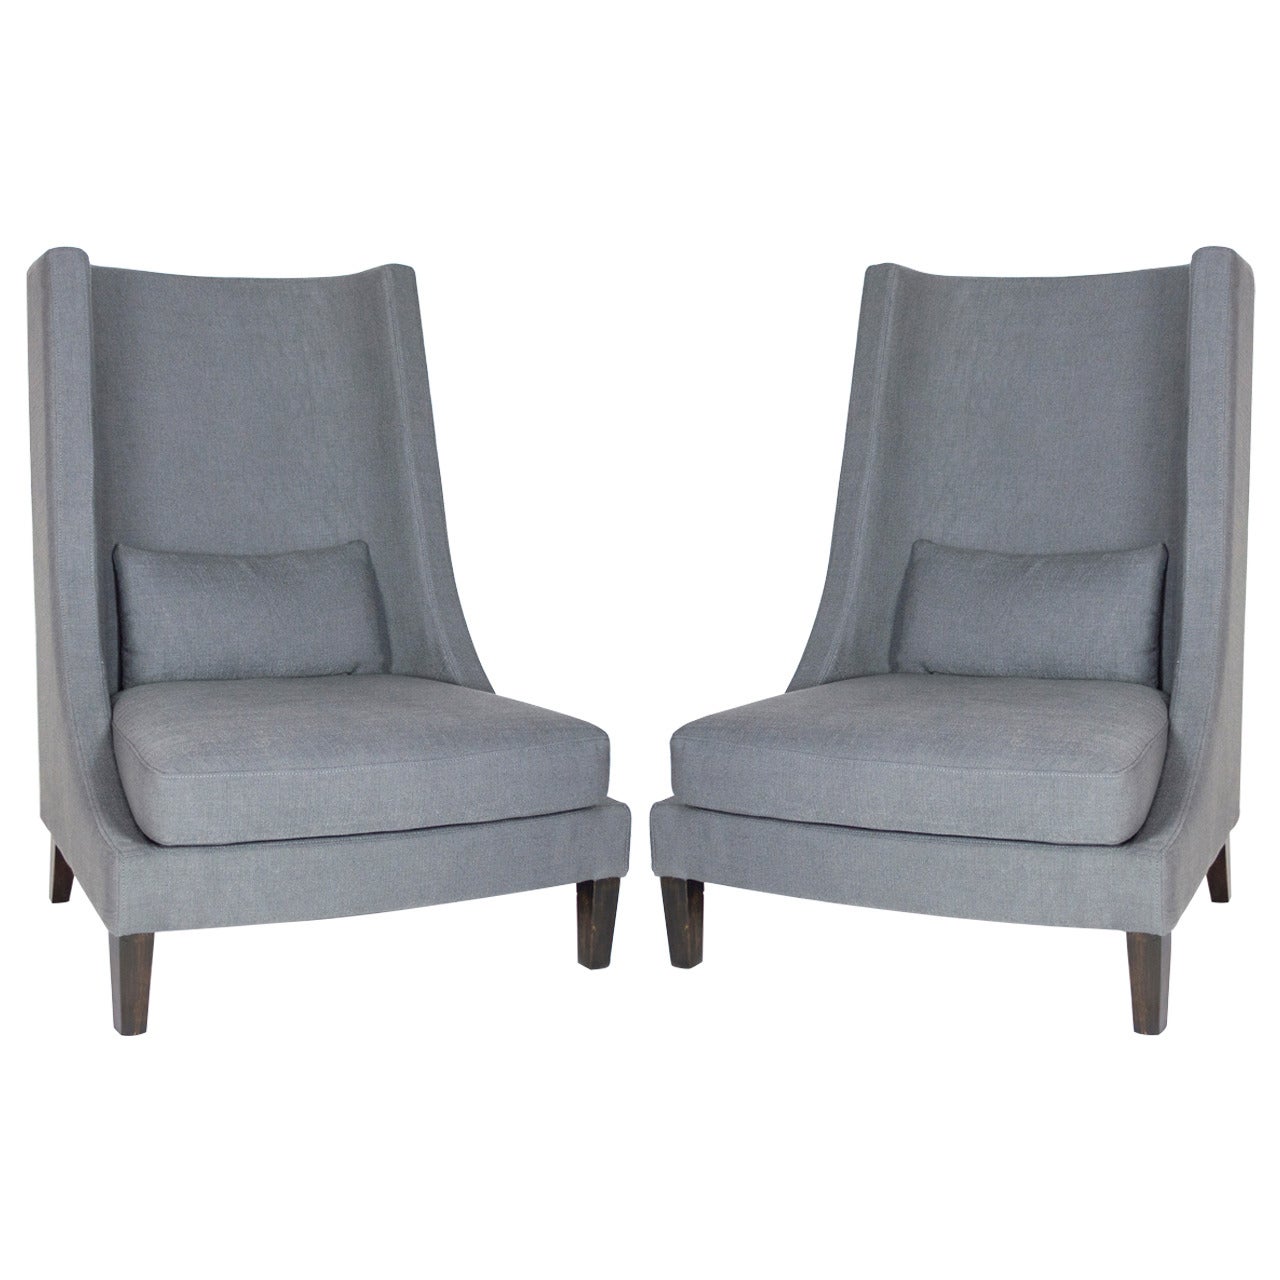 Pair of Wing Back Chair